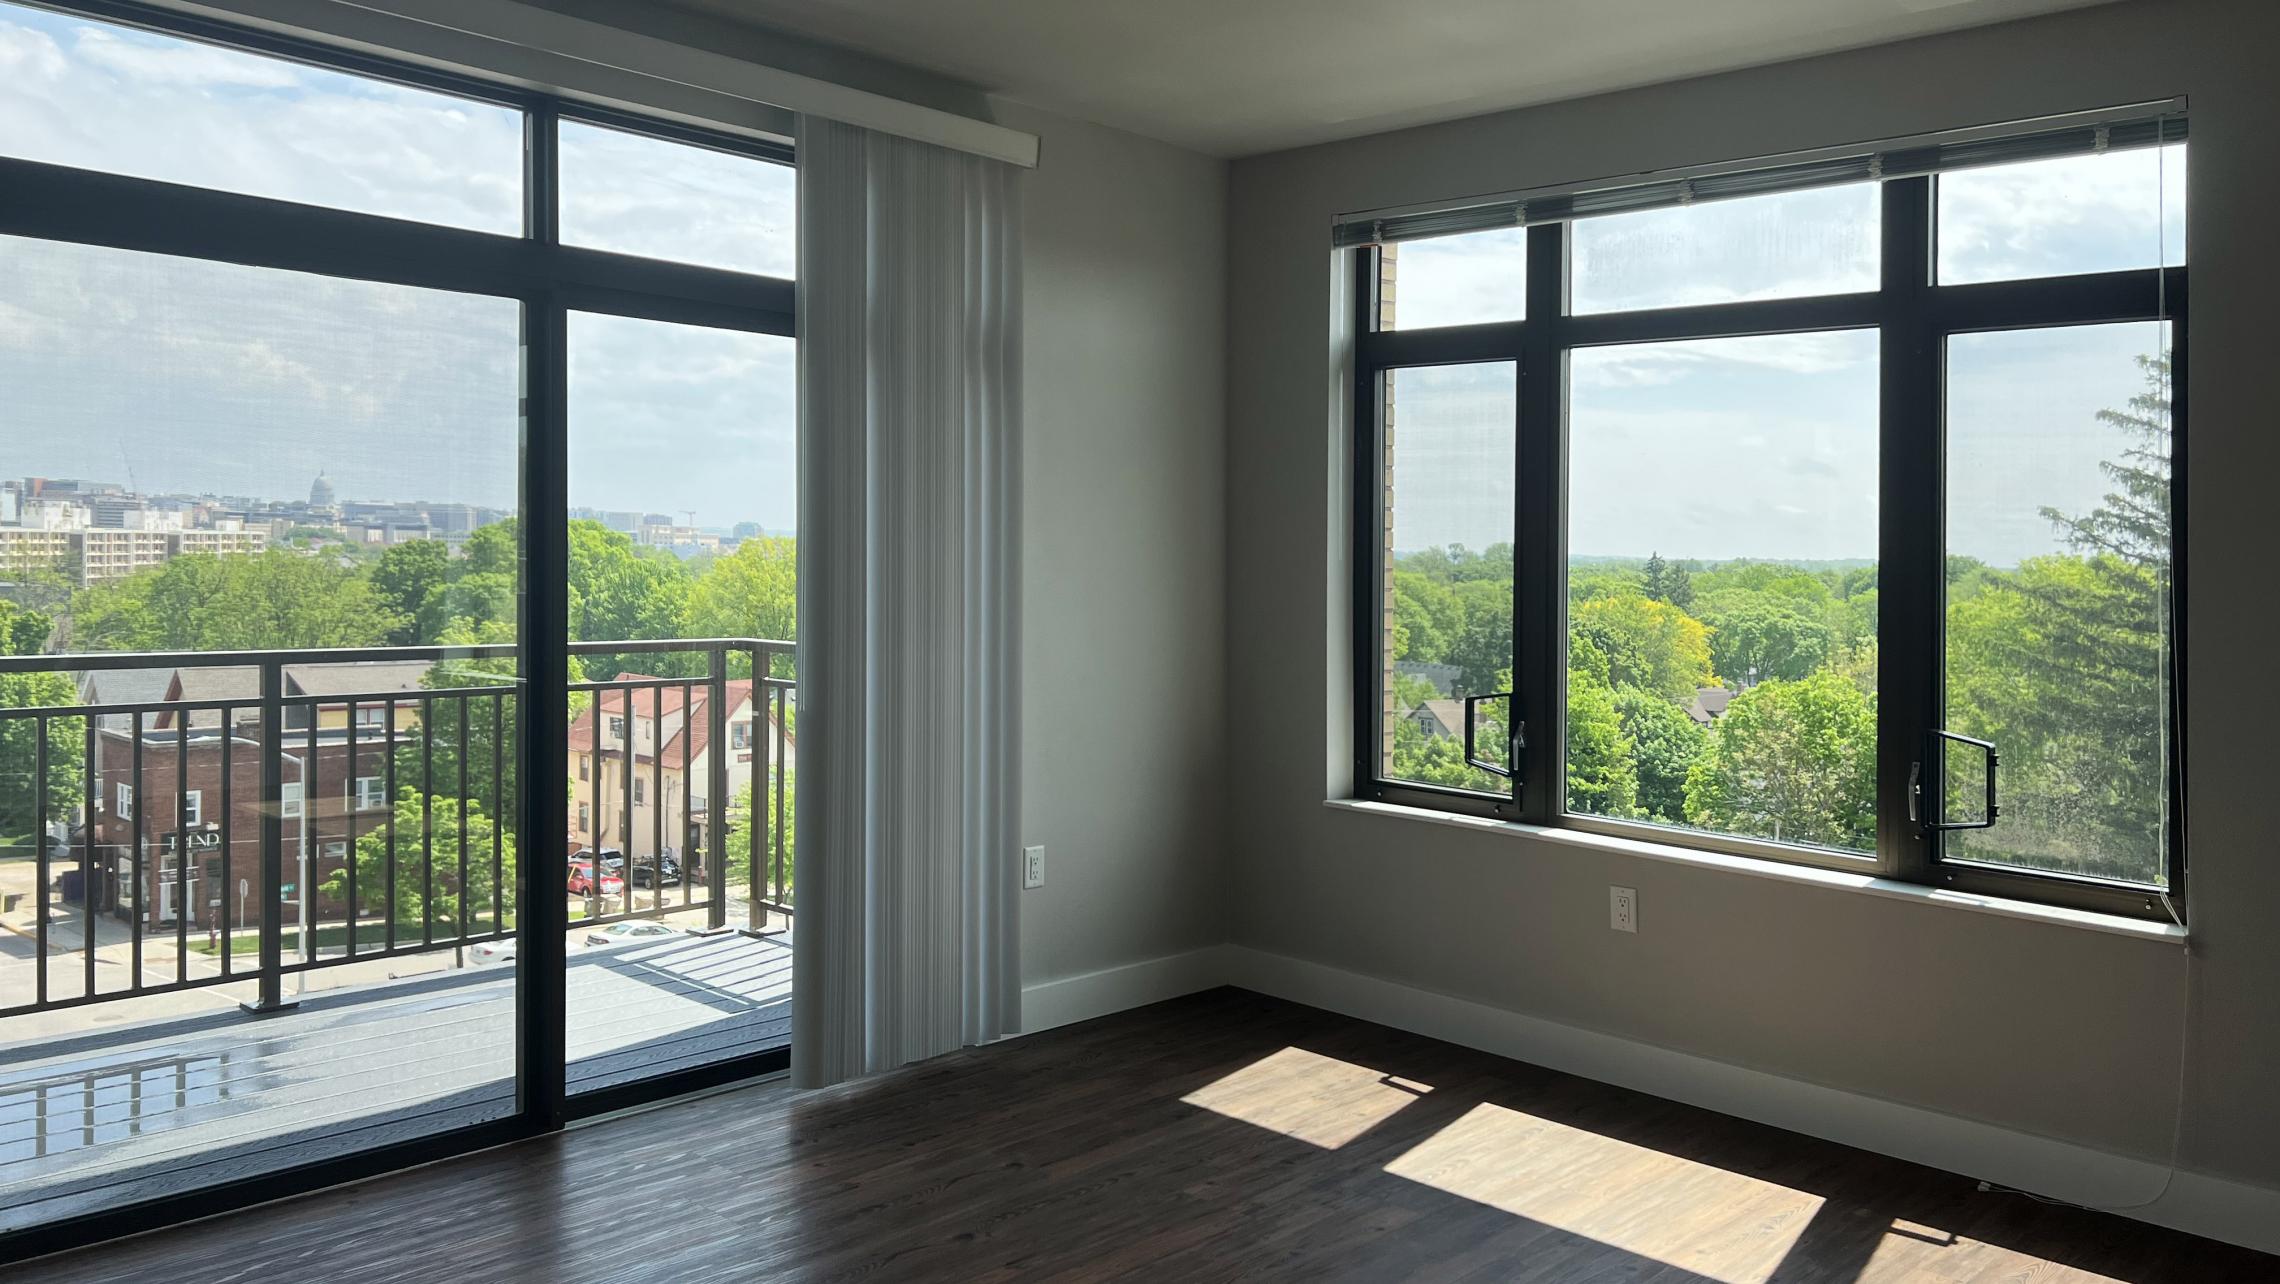 1722-Monroe-Apartment-401-Two-Bedroom-One-Bathroom-Corner-Camp-Randall-Luxury-Living-Kitchen-Design-Rooftop-Terrace-Views-City-Madison-Fitness-Lounge-Balcony-Lifestyle-Capitol